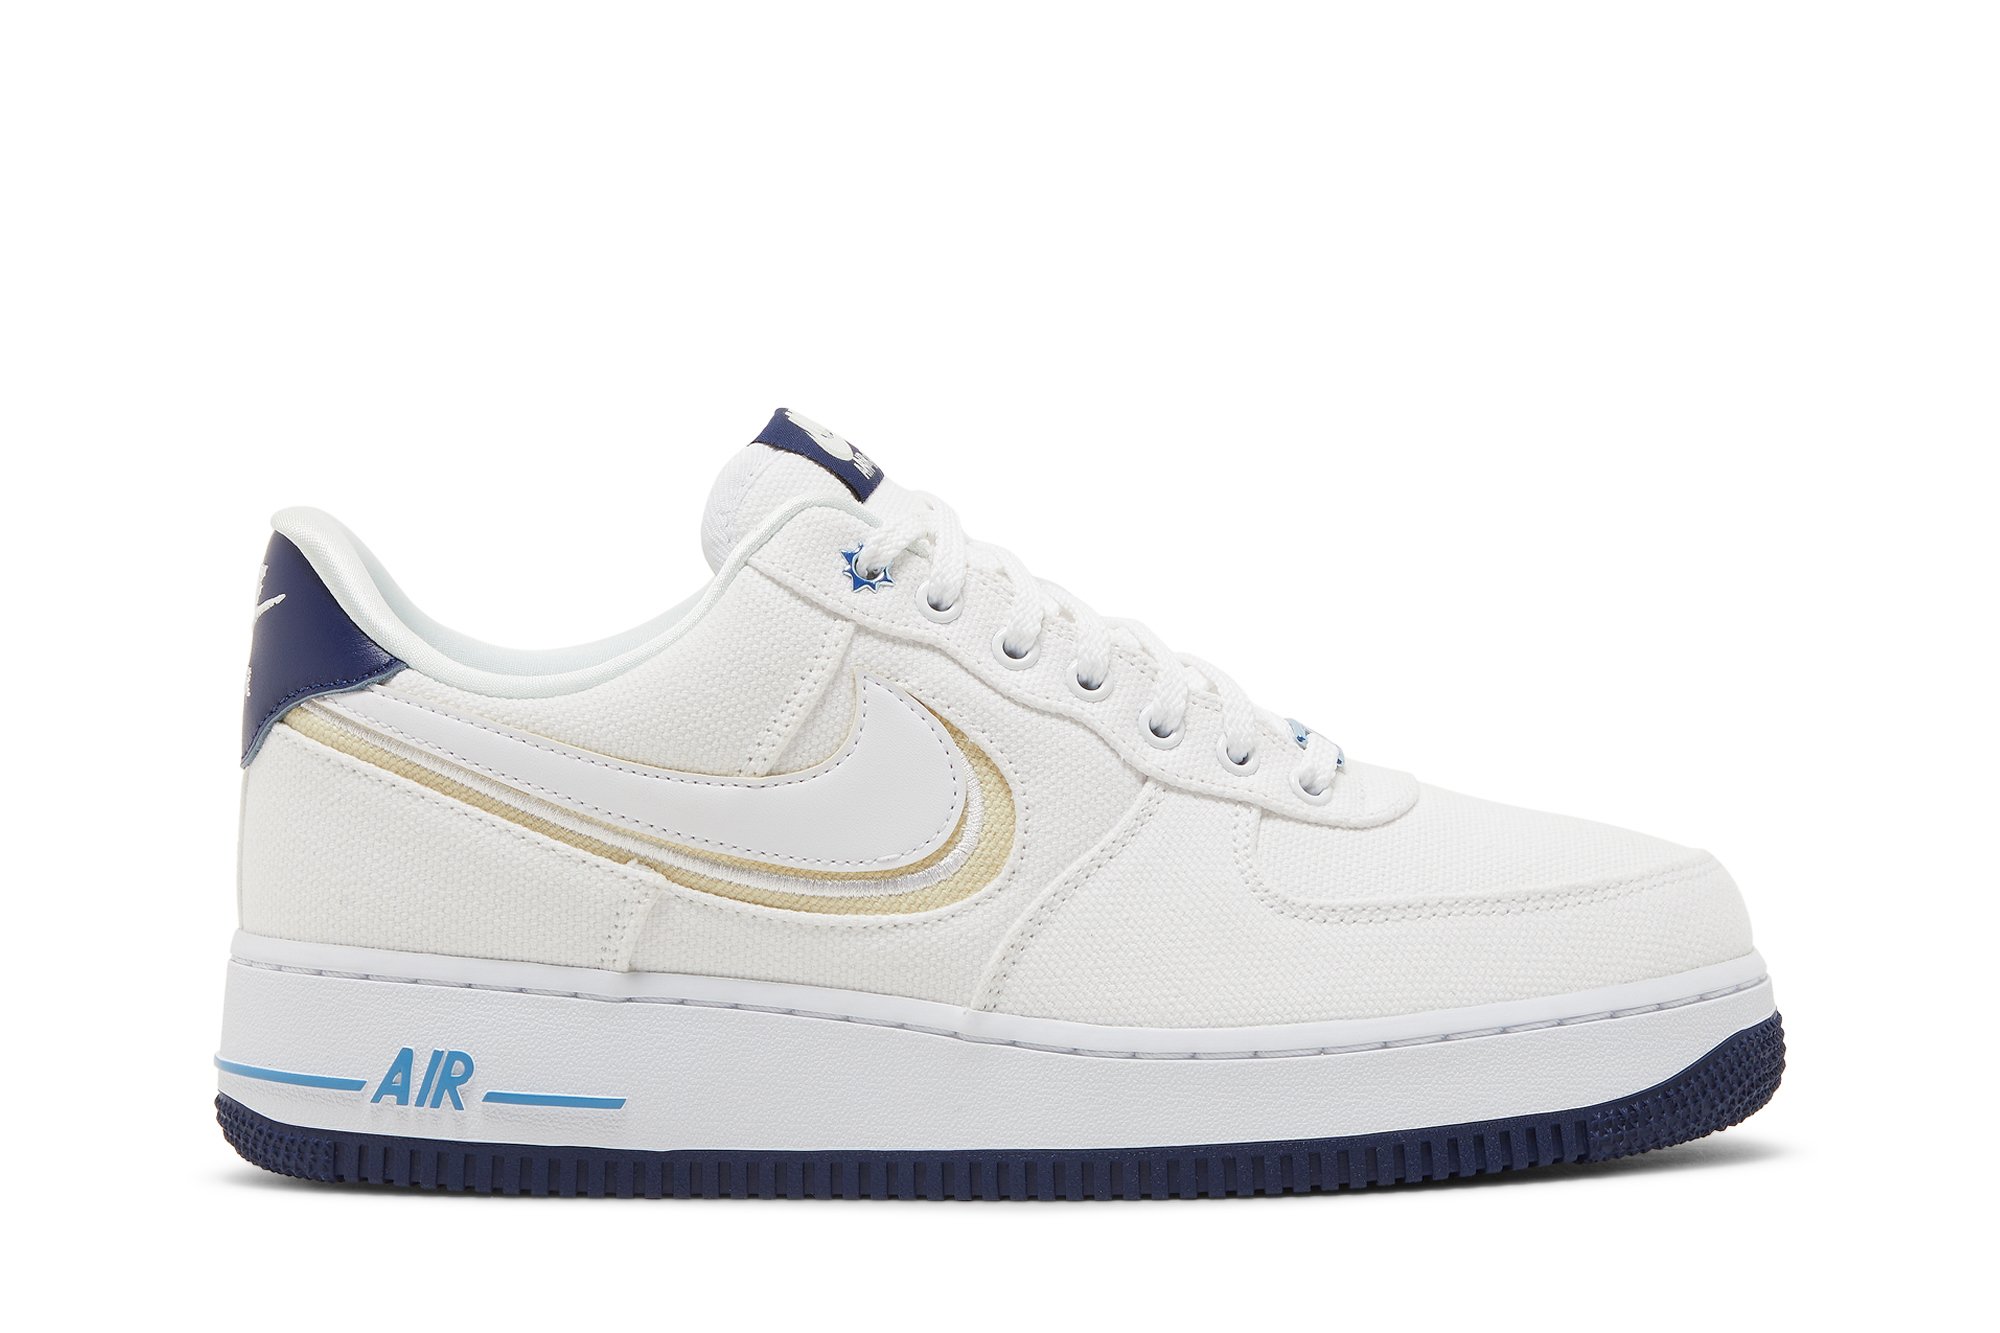 Buy Air Force 1 Premium 'White Fossil' - DB3541 100 | GOAT